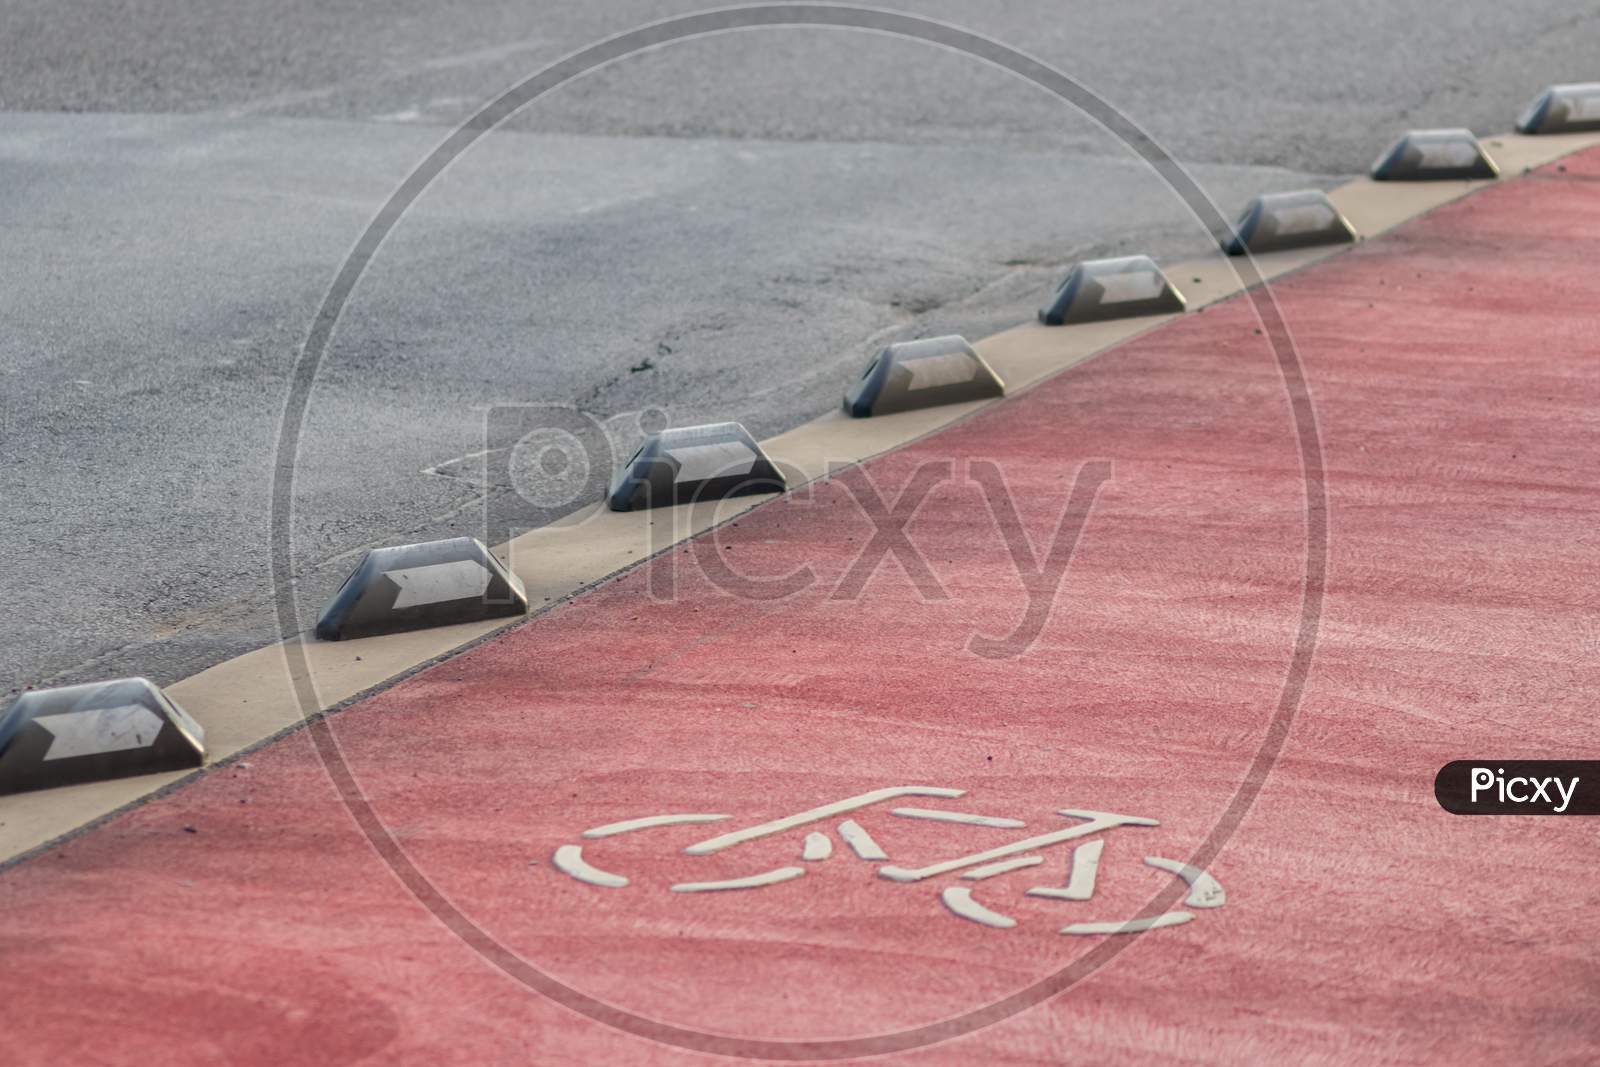 Safety in road traffic for bicycles and bikers by bike way protection and car guidance systems on the red lane for cyclists shows biking friendly city streets for sustainable mobility and ecology